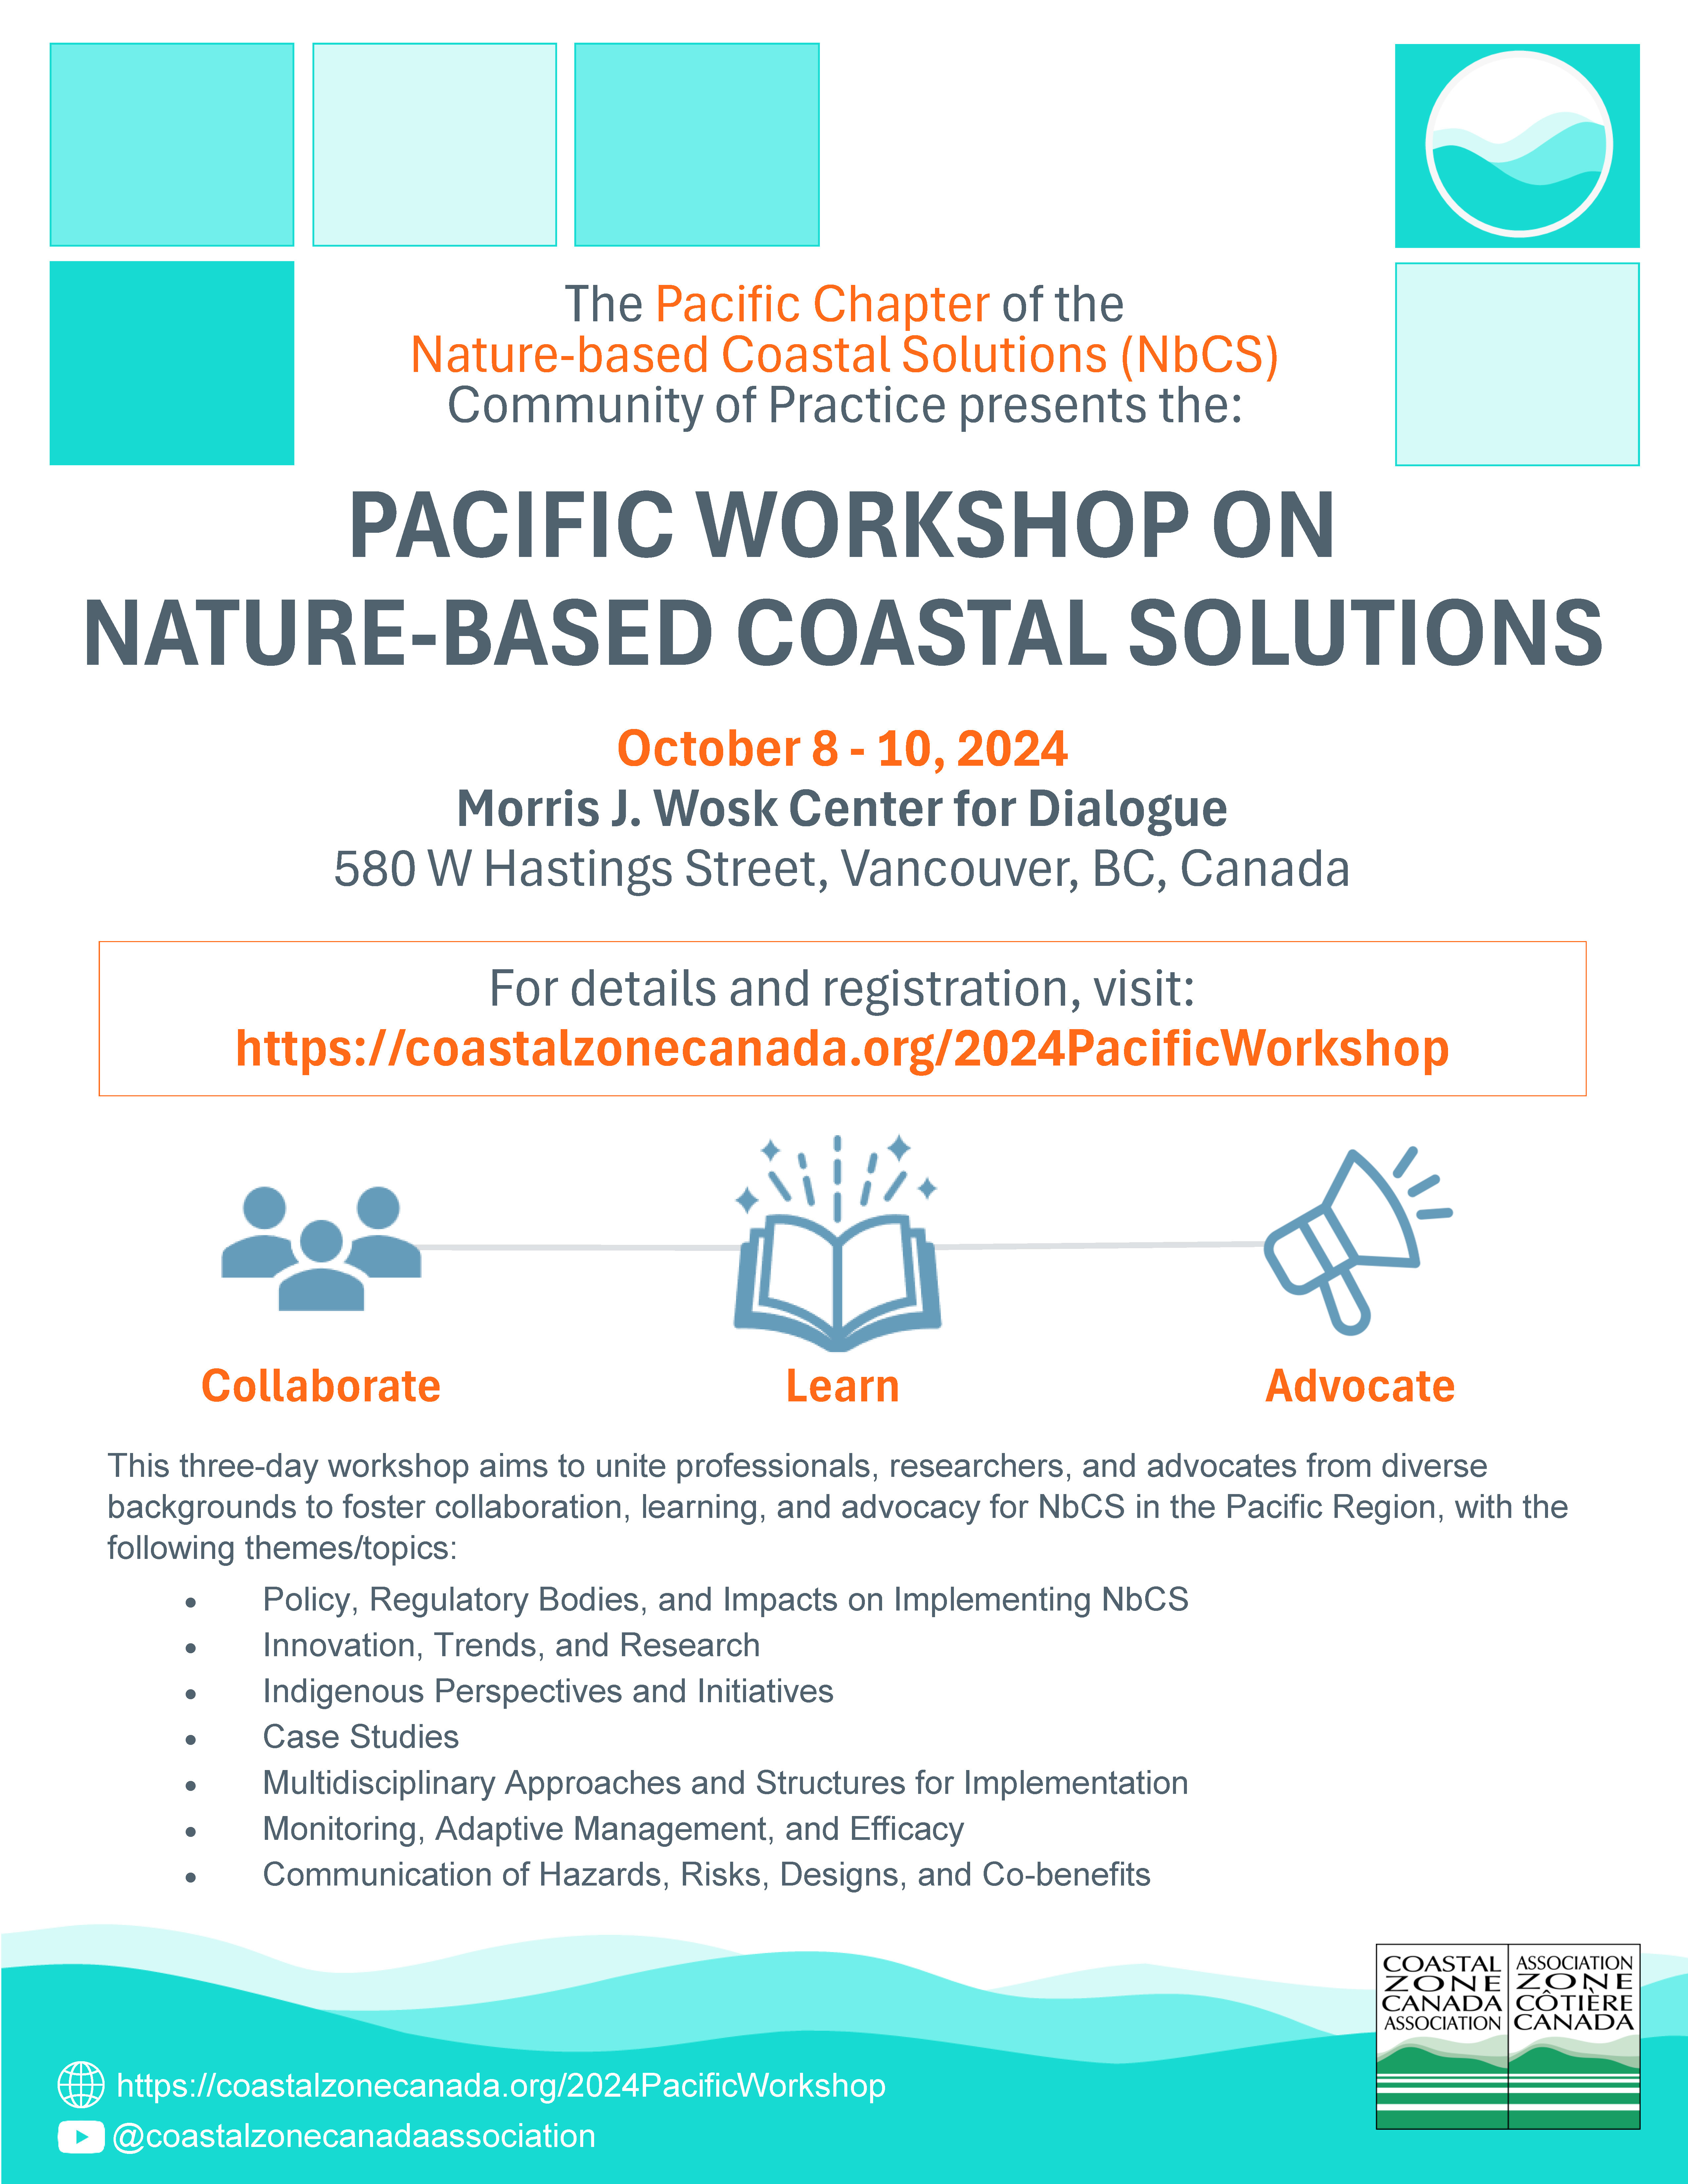 Pacific Workshop on Nature Based Coastal Solutions